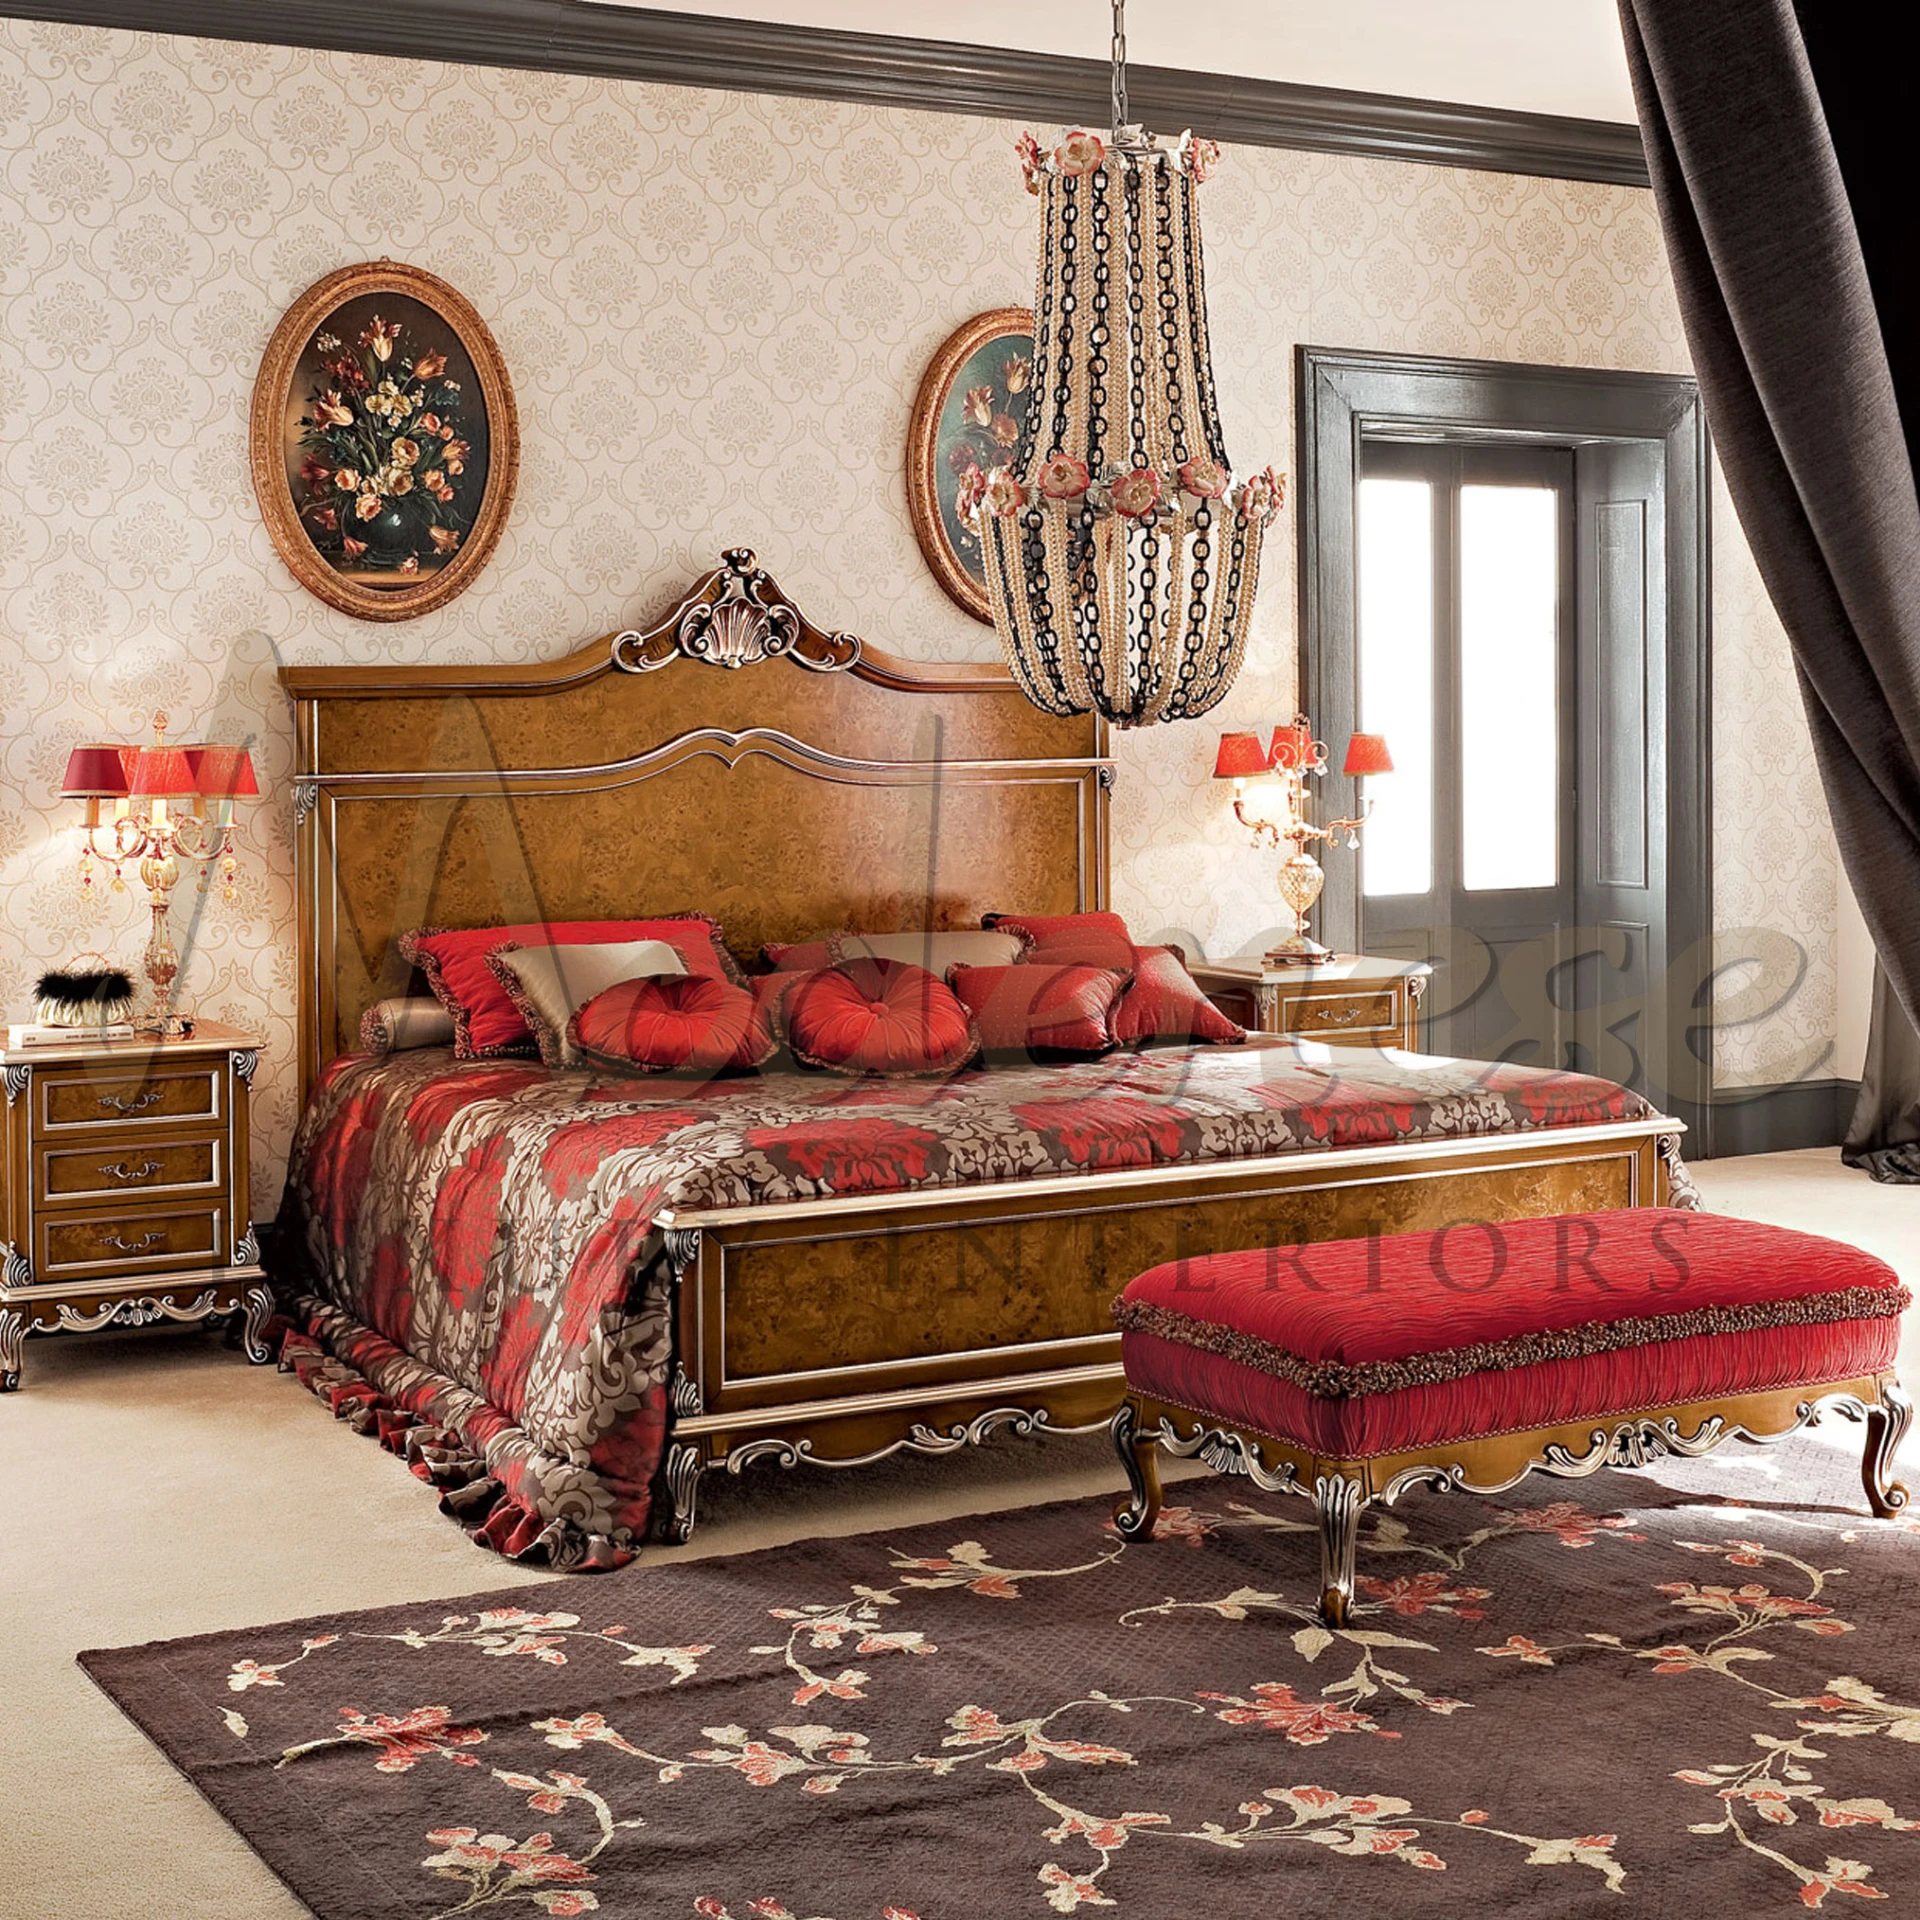 Elegant bedroom created by Modenese Furniture Manufacturer with a burl wood bed, red accents, matching drapery, classic artwork, and a unique chandelier.